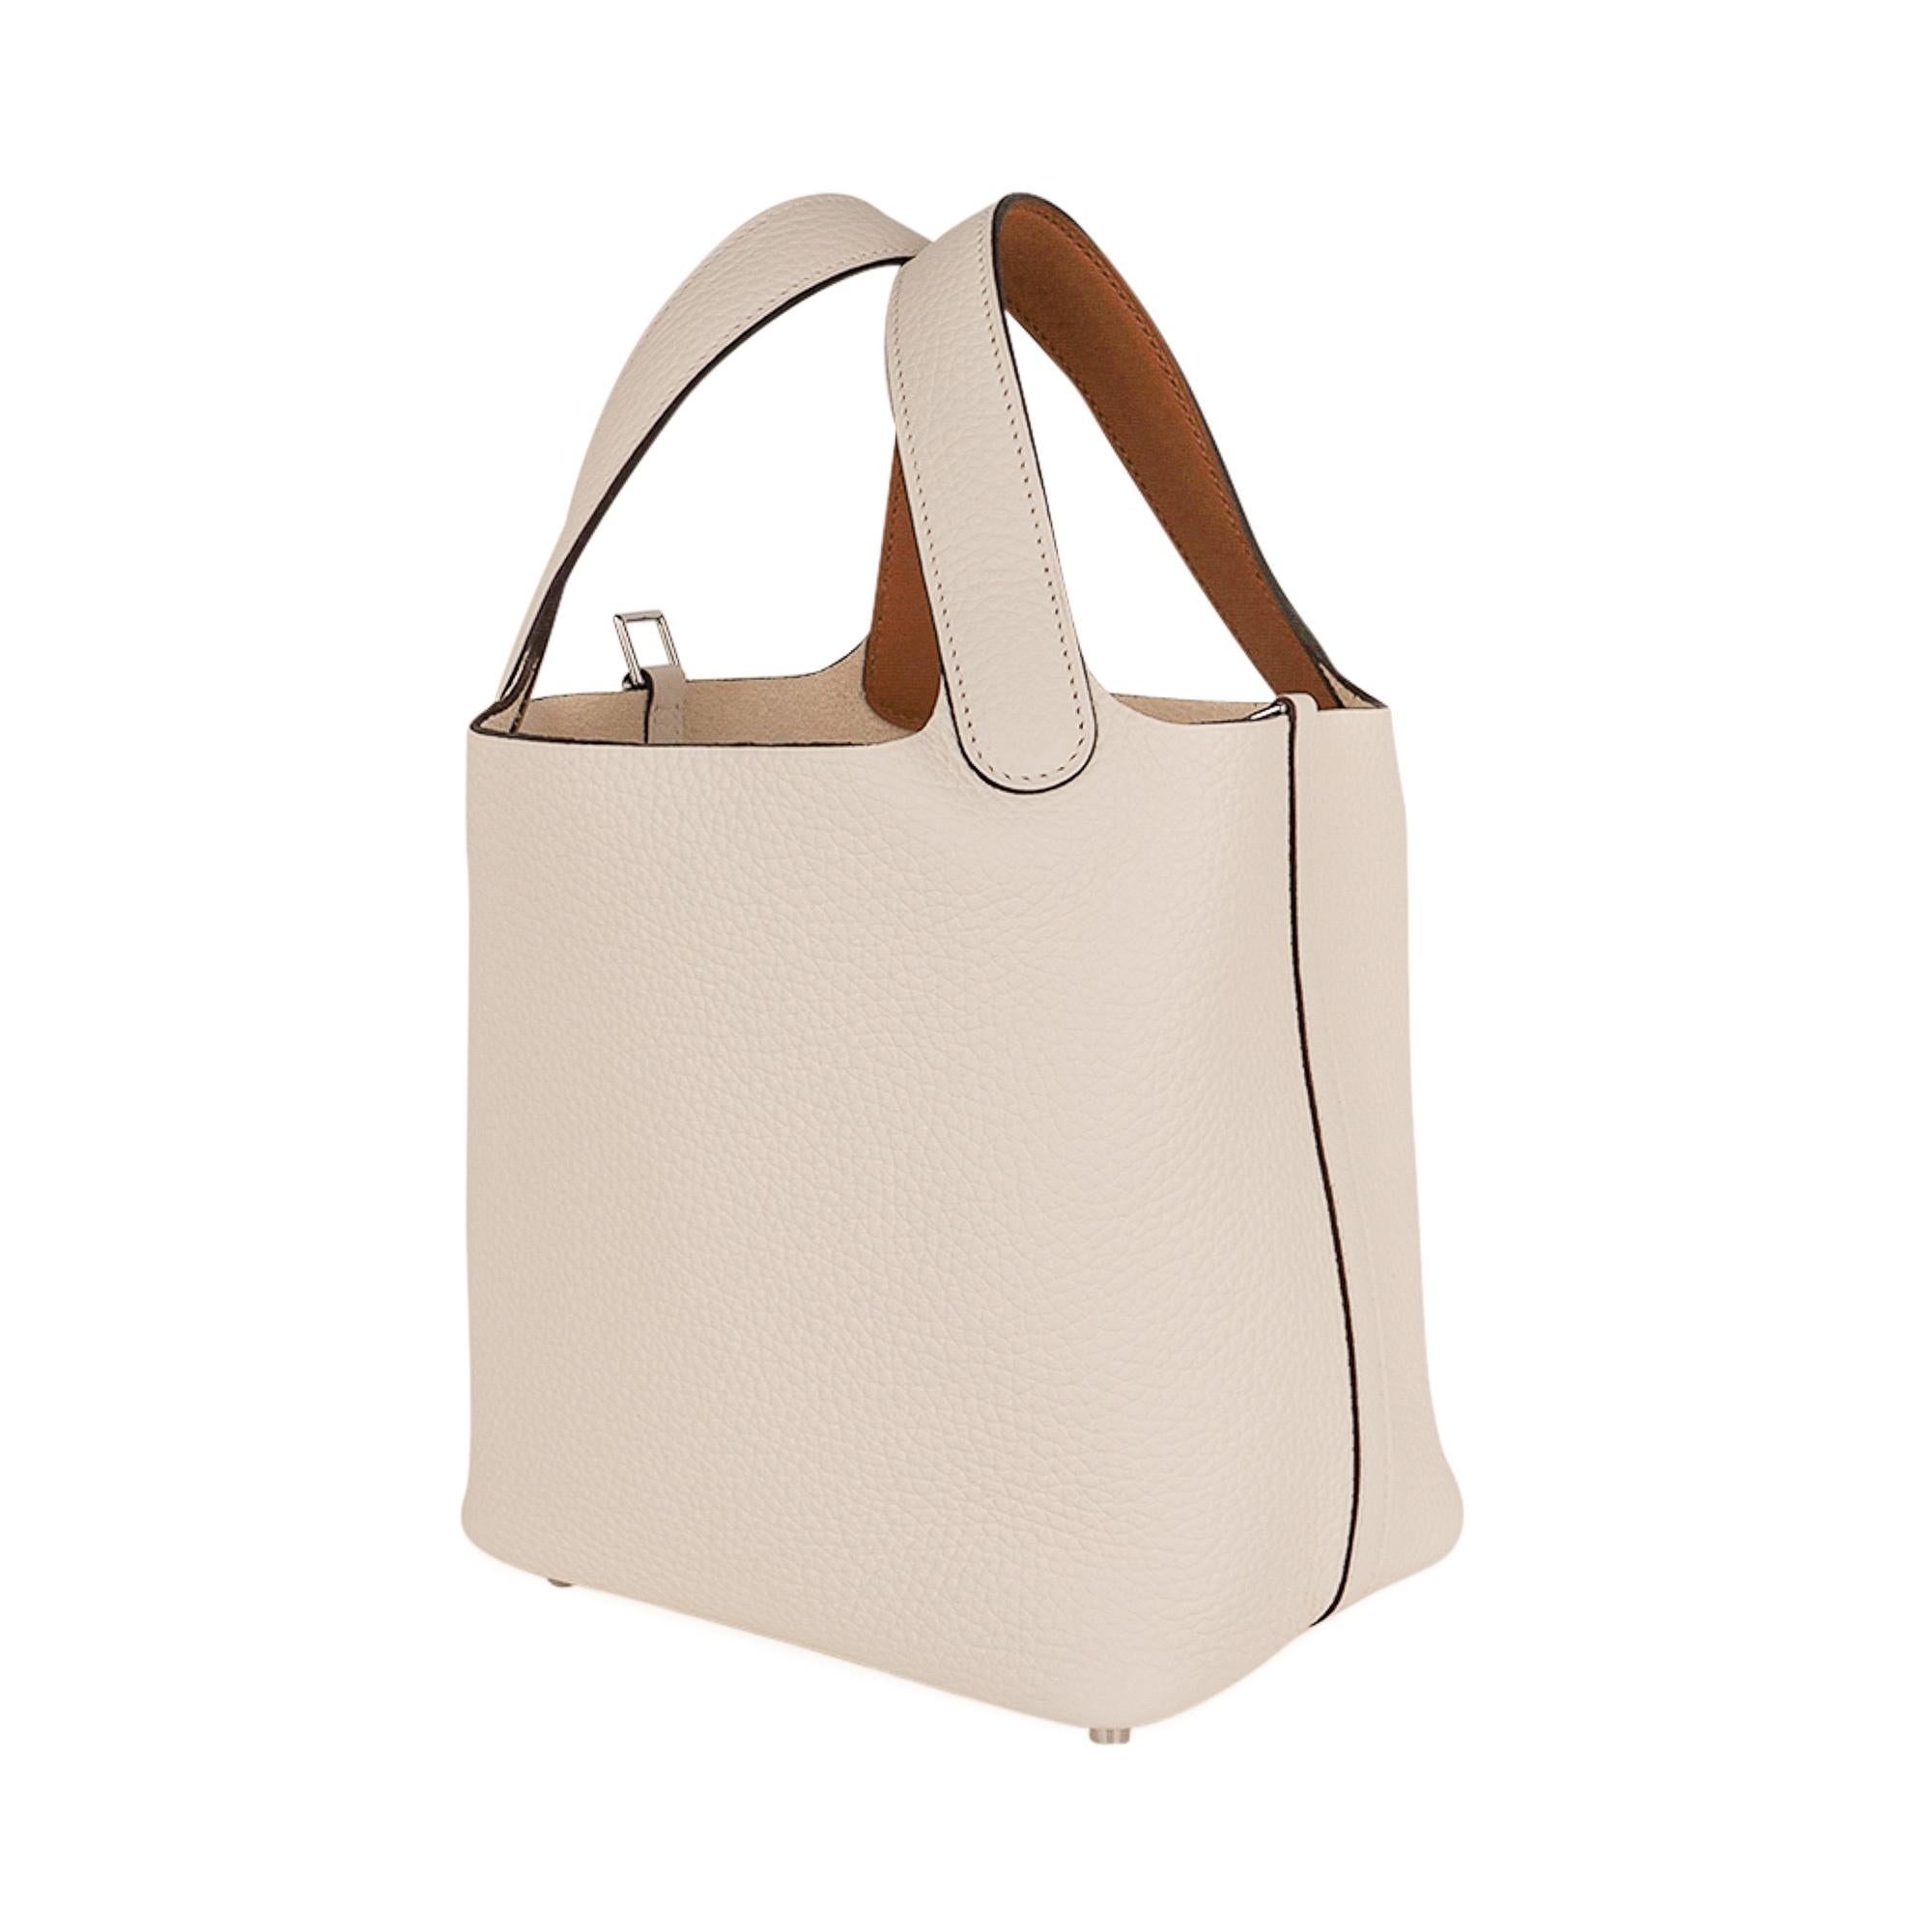 Hermes Picotin Eclat Lock 18 tote bag in Nata and Sesame.
The bag is Nata, a beautiful chalk white, with the interior of the handles Sesame, a contrasting warm tone.
The interior of the handle is Swift leather.
The body of the bag and exterior